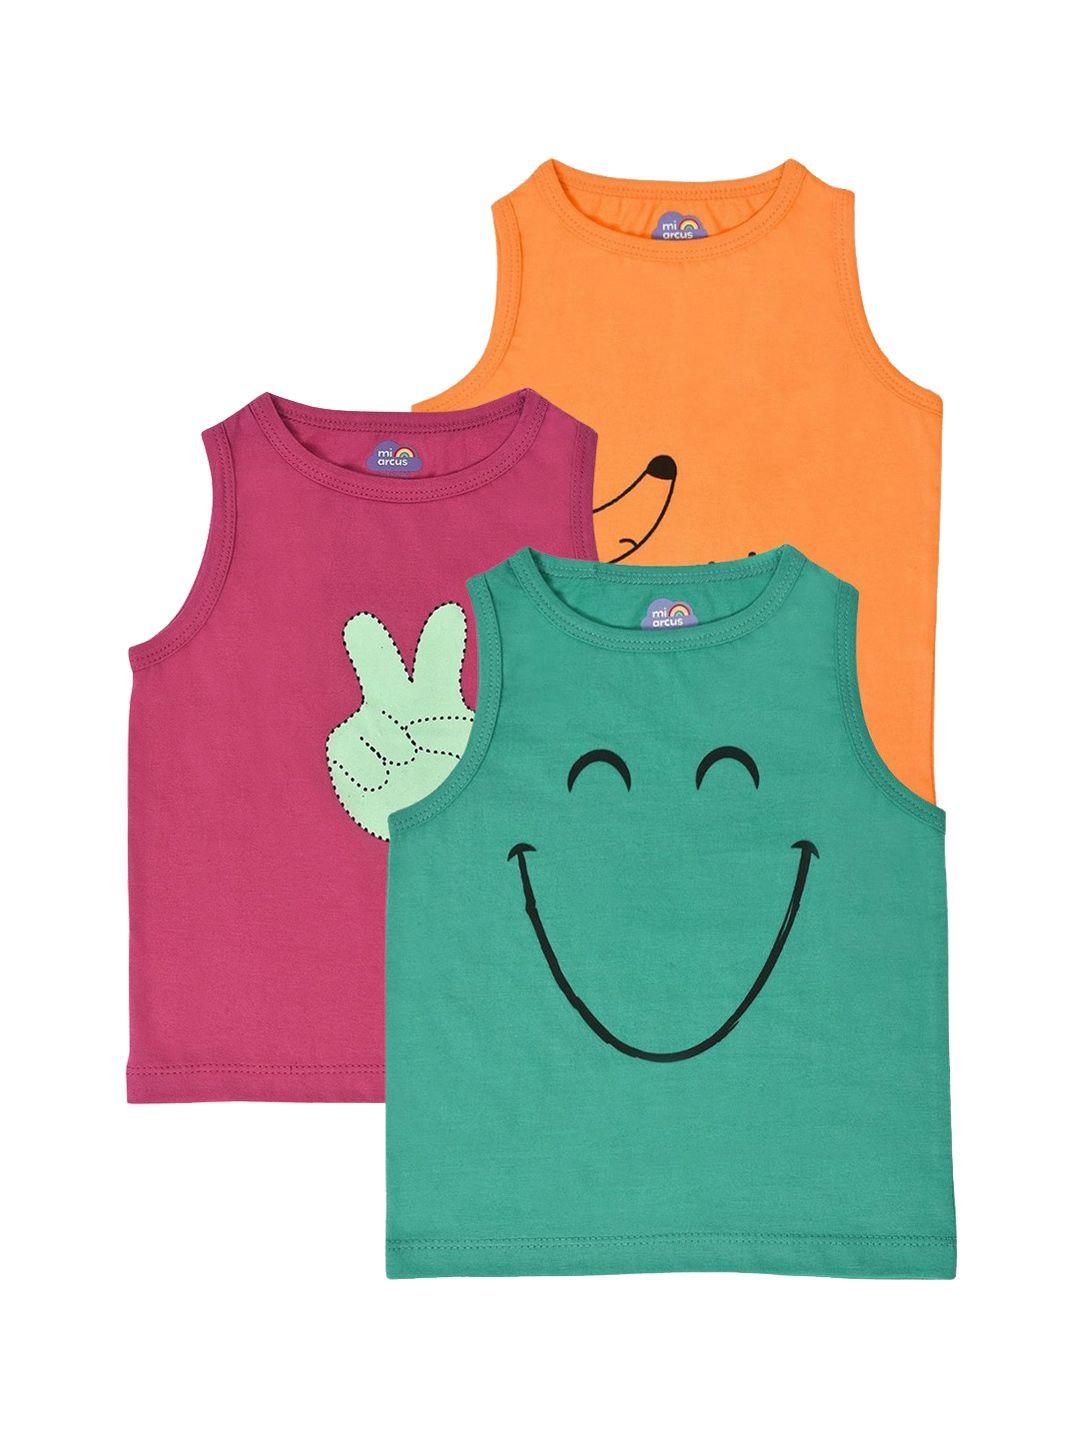 miarcus kids pack of 3 printed cotton basic vests